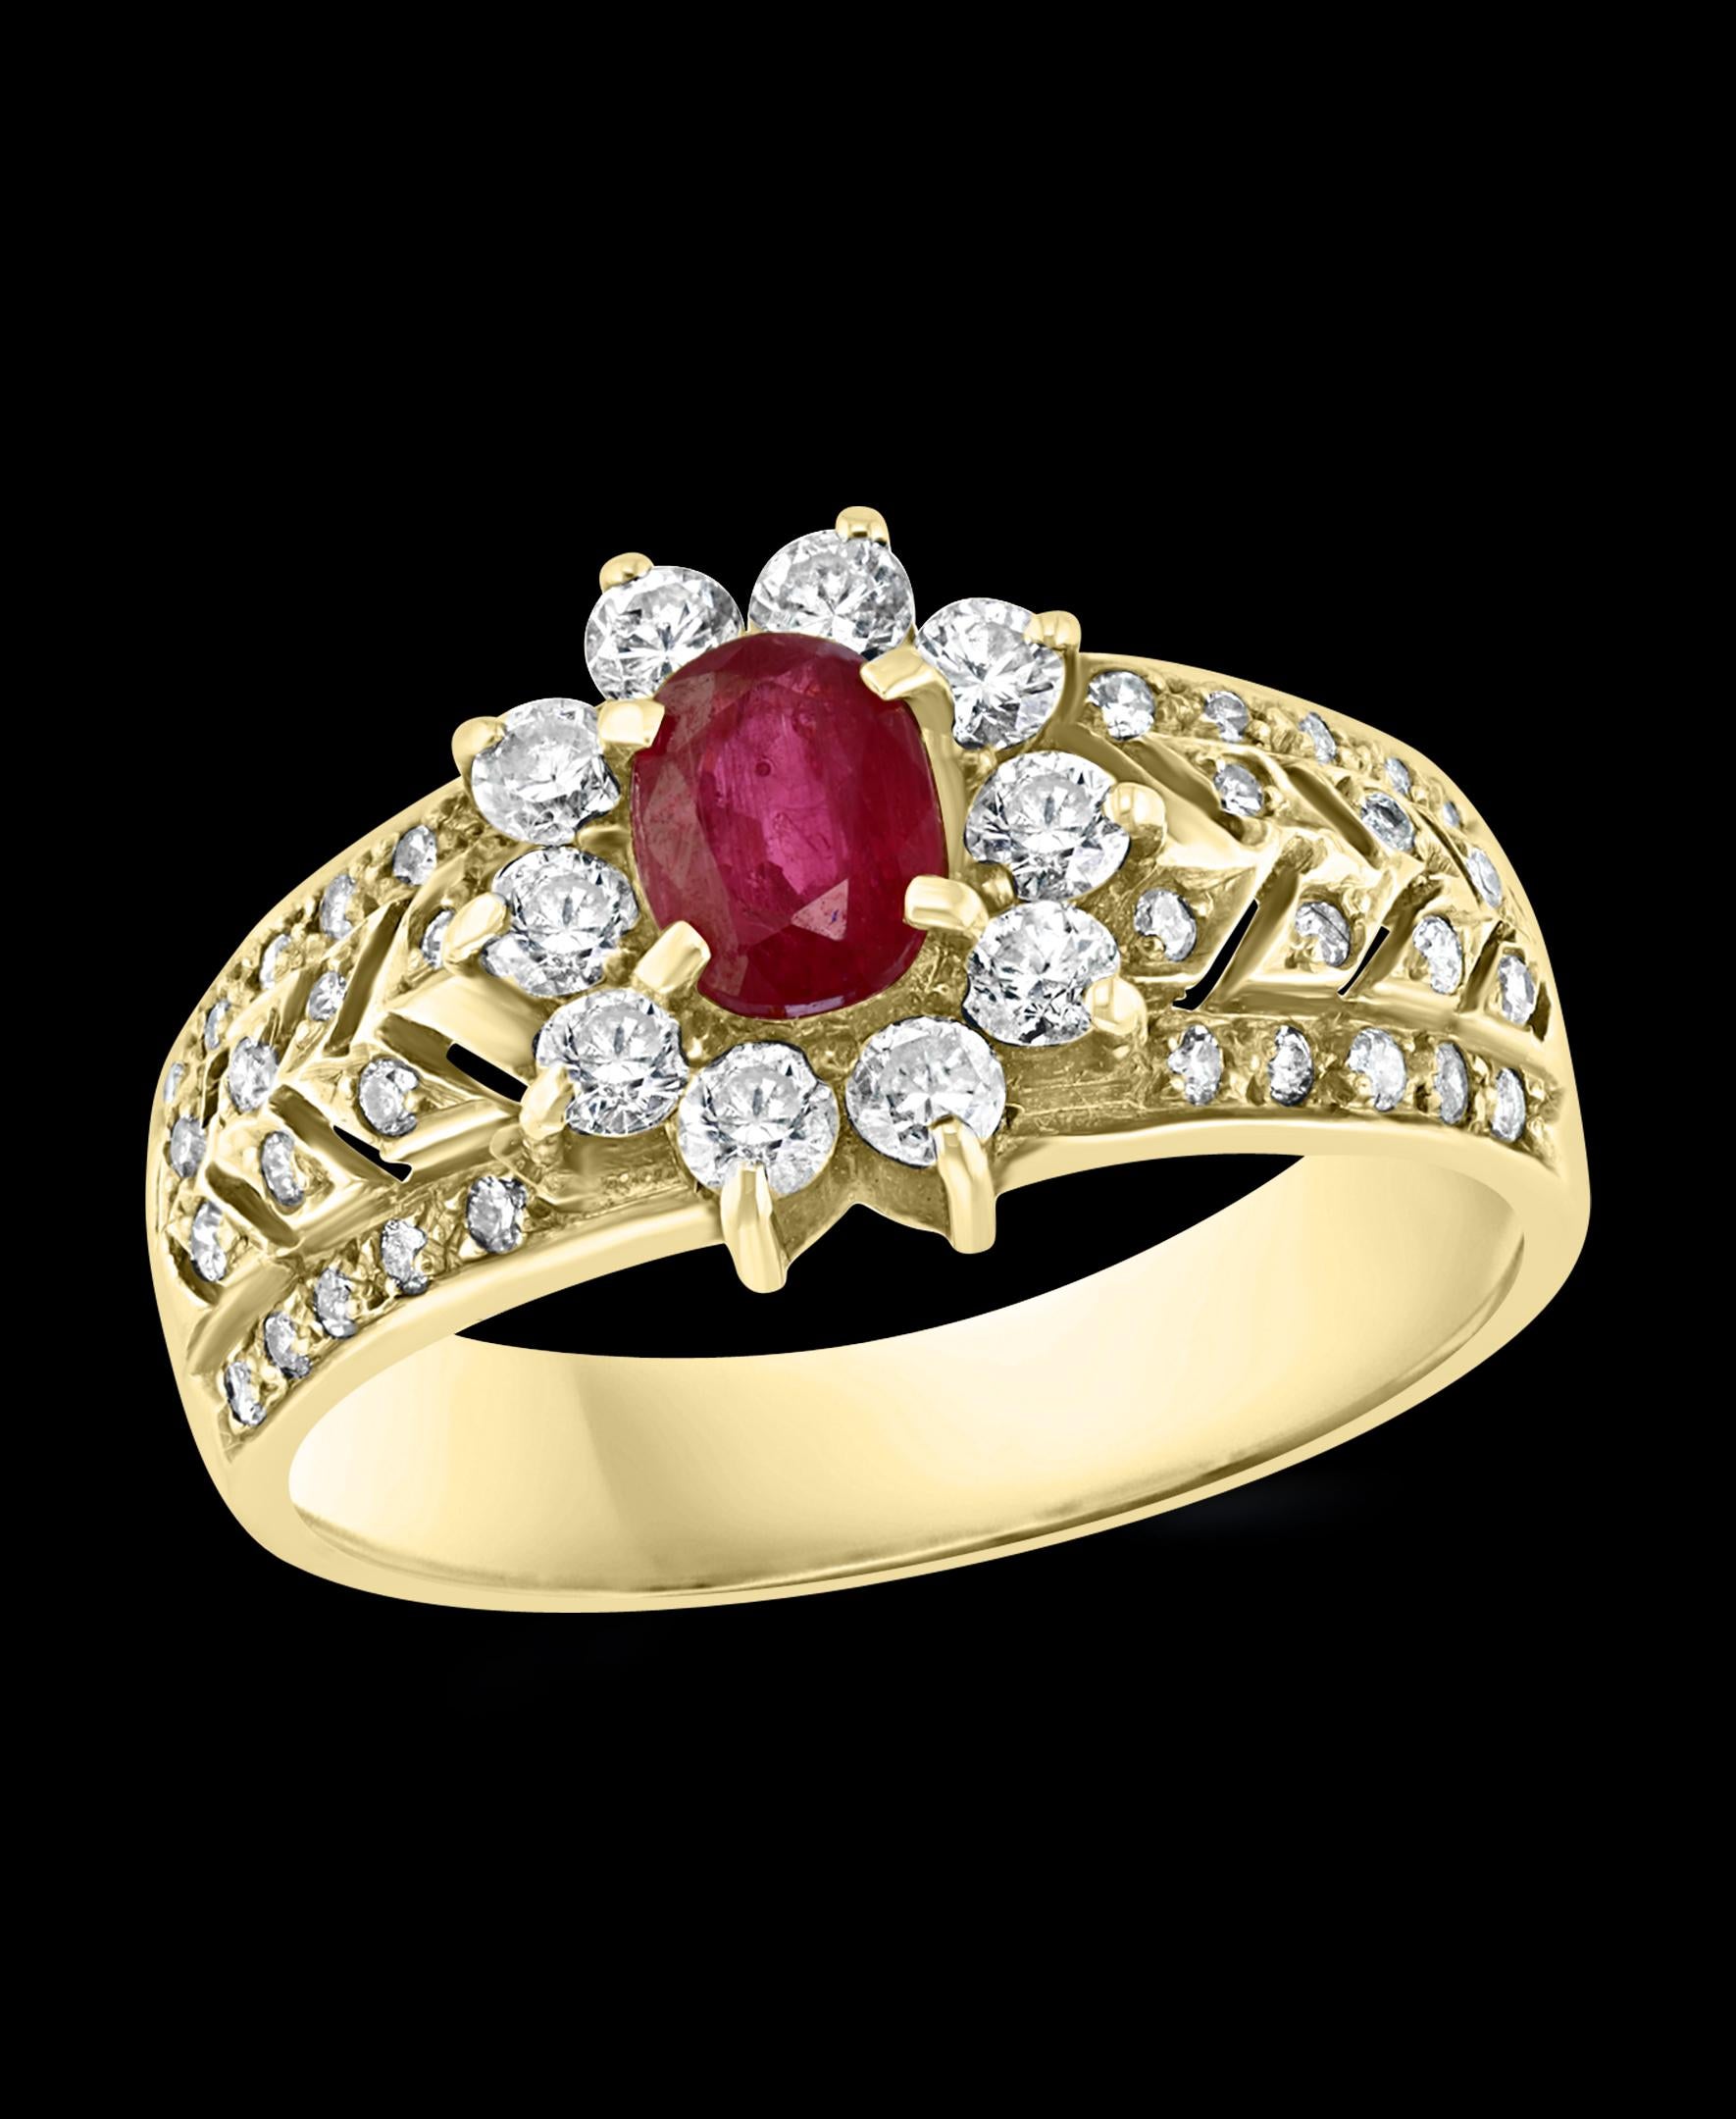 0.50 Carat Natural Ruby And Diamond 14 Karat Yellow Gold Ring Size 6

 Half Carat of very clean   natural    Ruby  and Diamond Ring
 I think the origin is Burma but  do not have certificate.
 prong set
14 K Yellow Gold: 4  gram
Stamped 14K
Ring Size